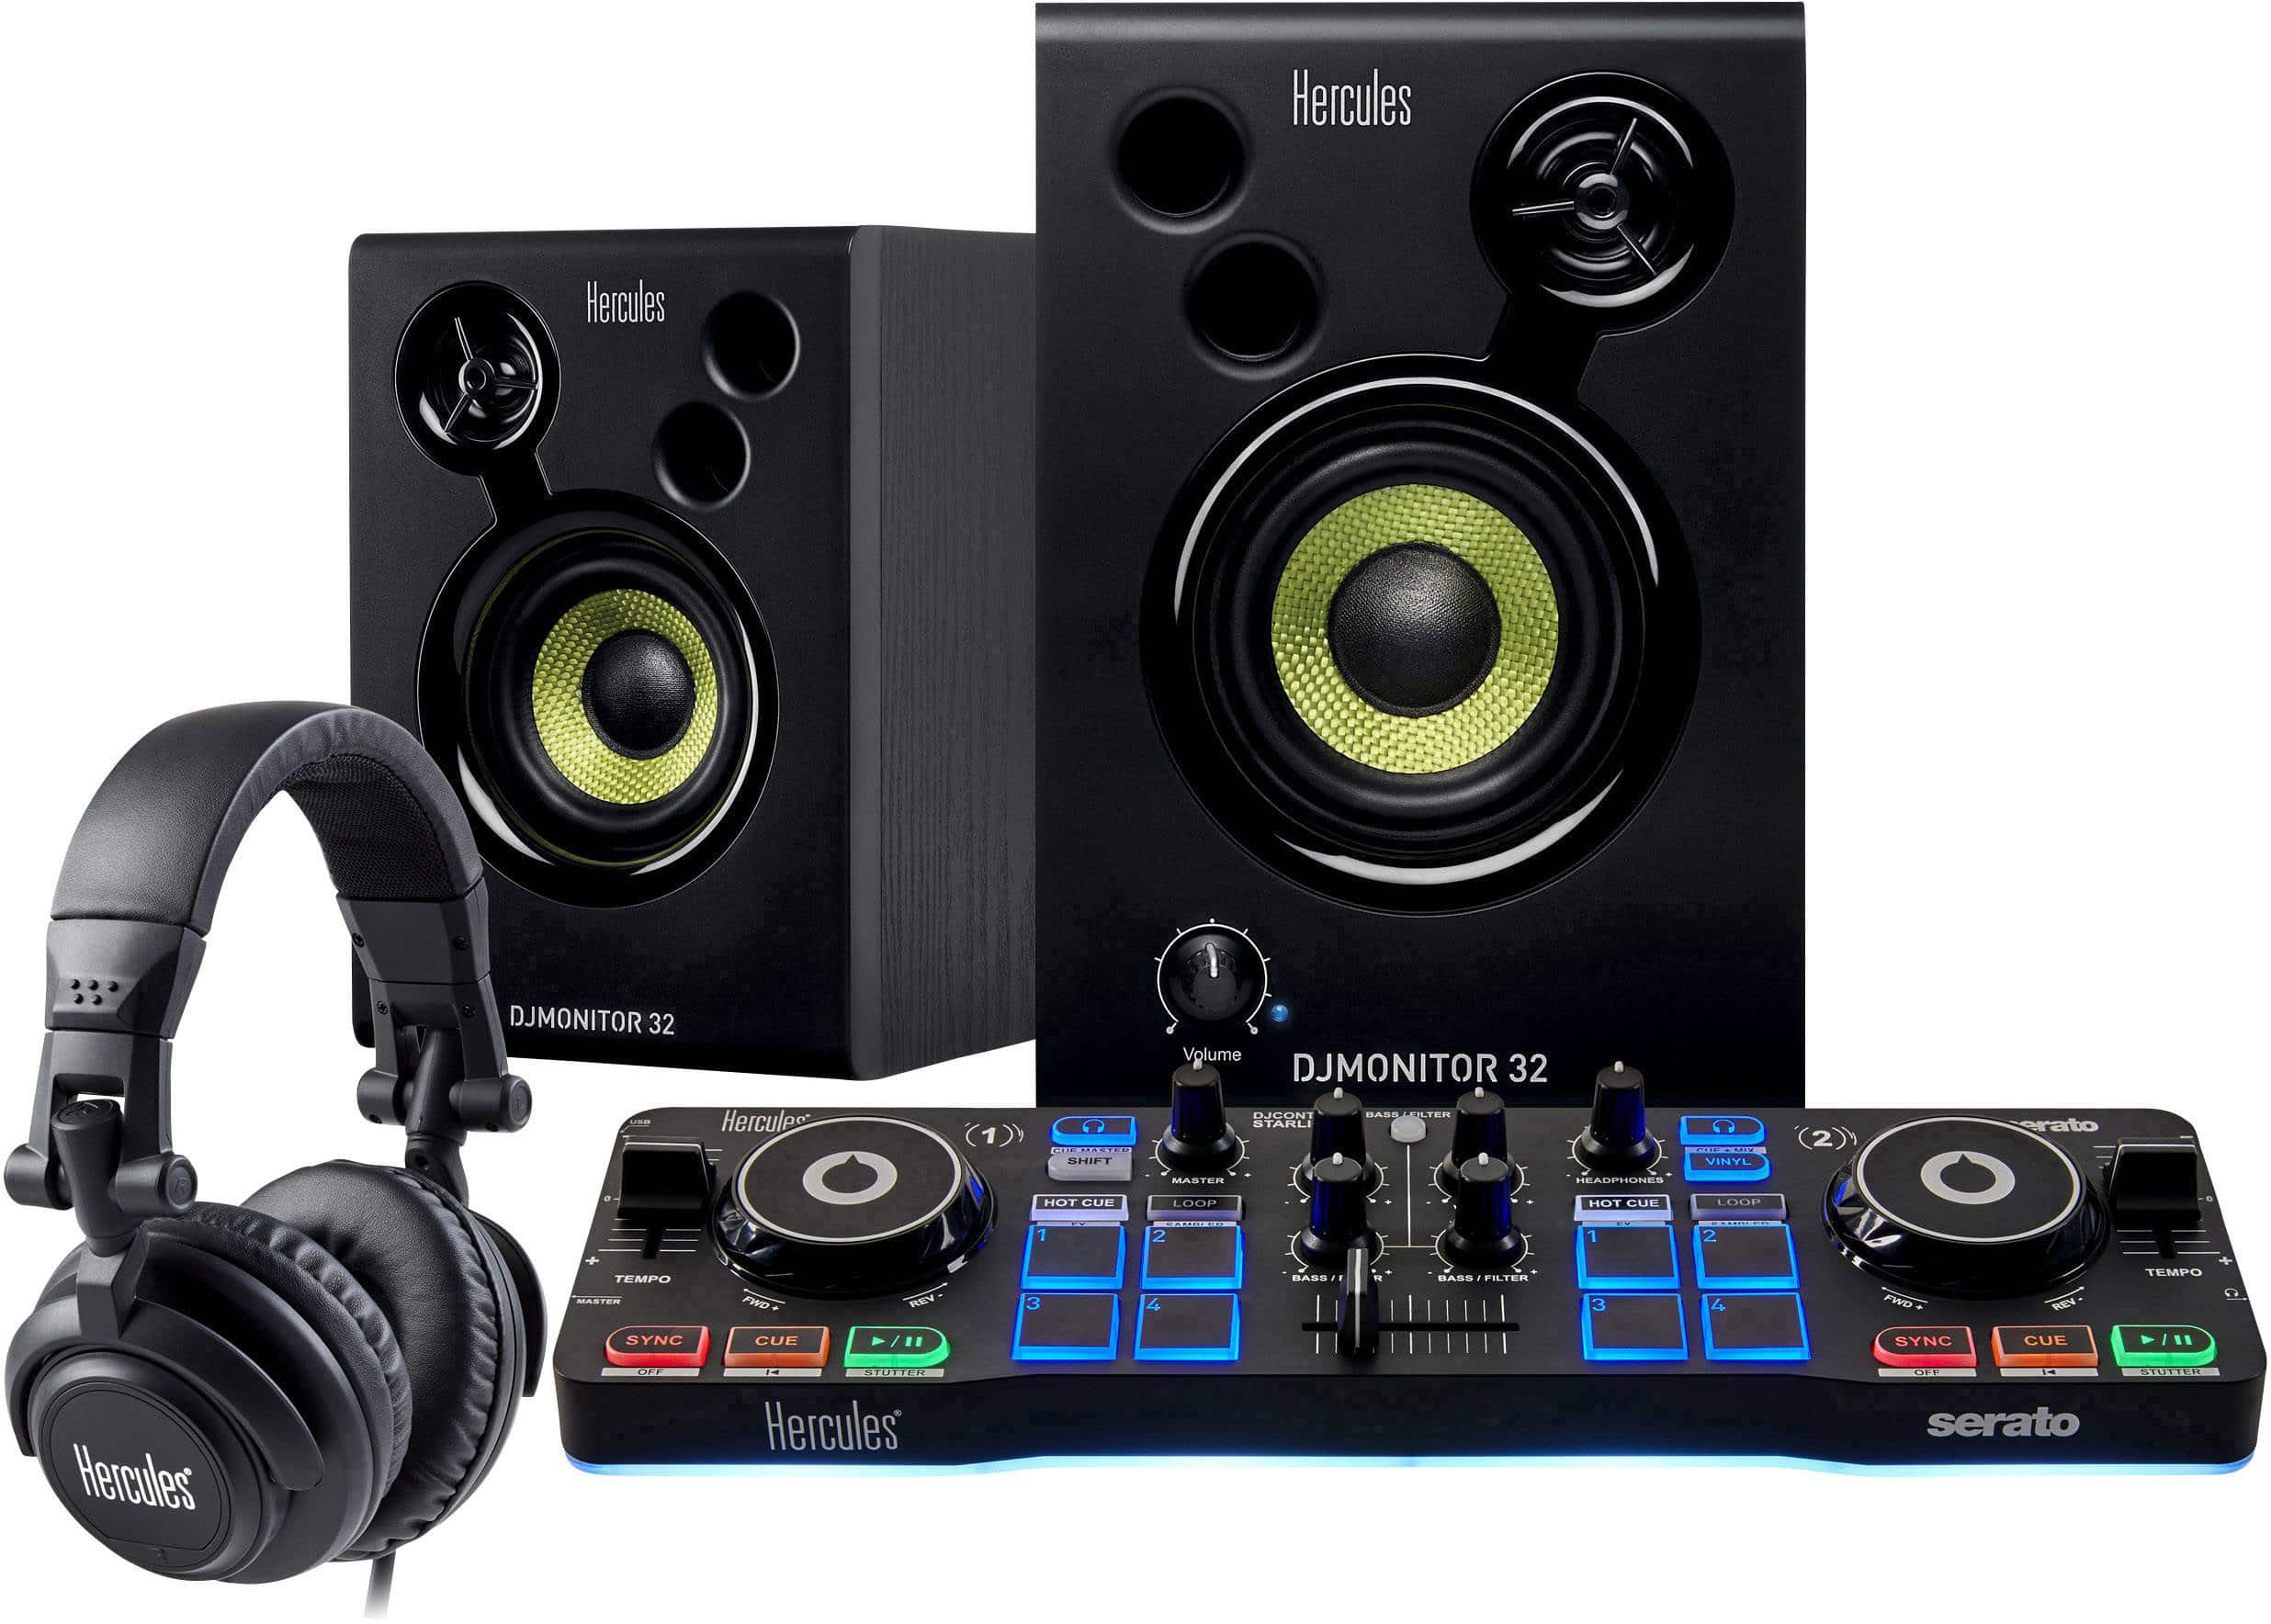 Hercules offers a comprehensive range of controllers to acquire and master DJ skills